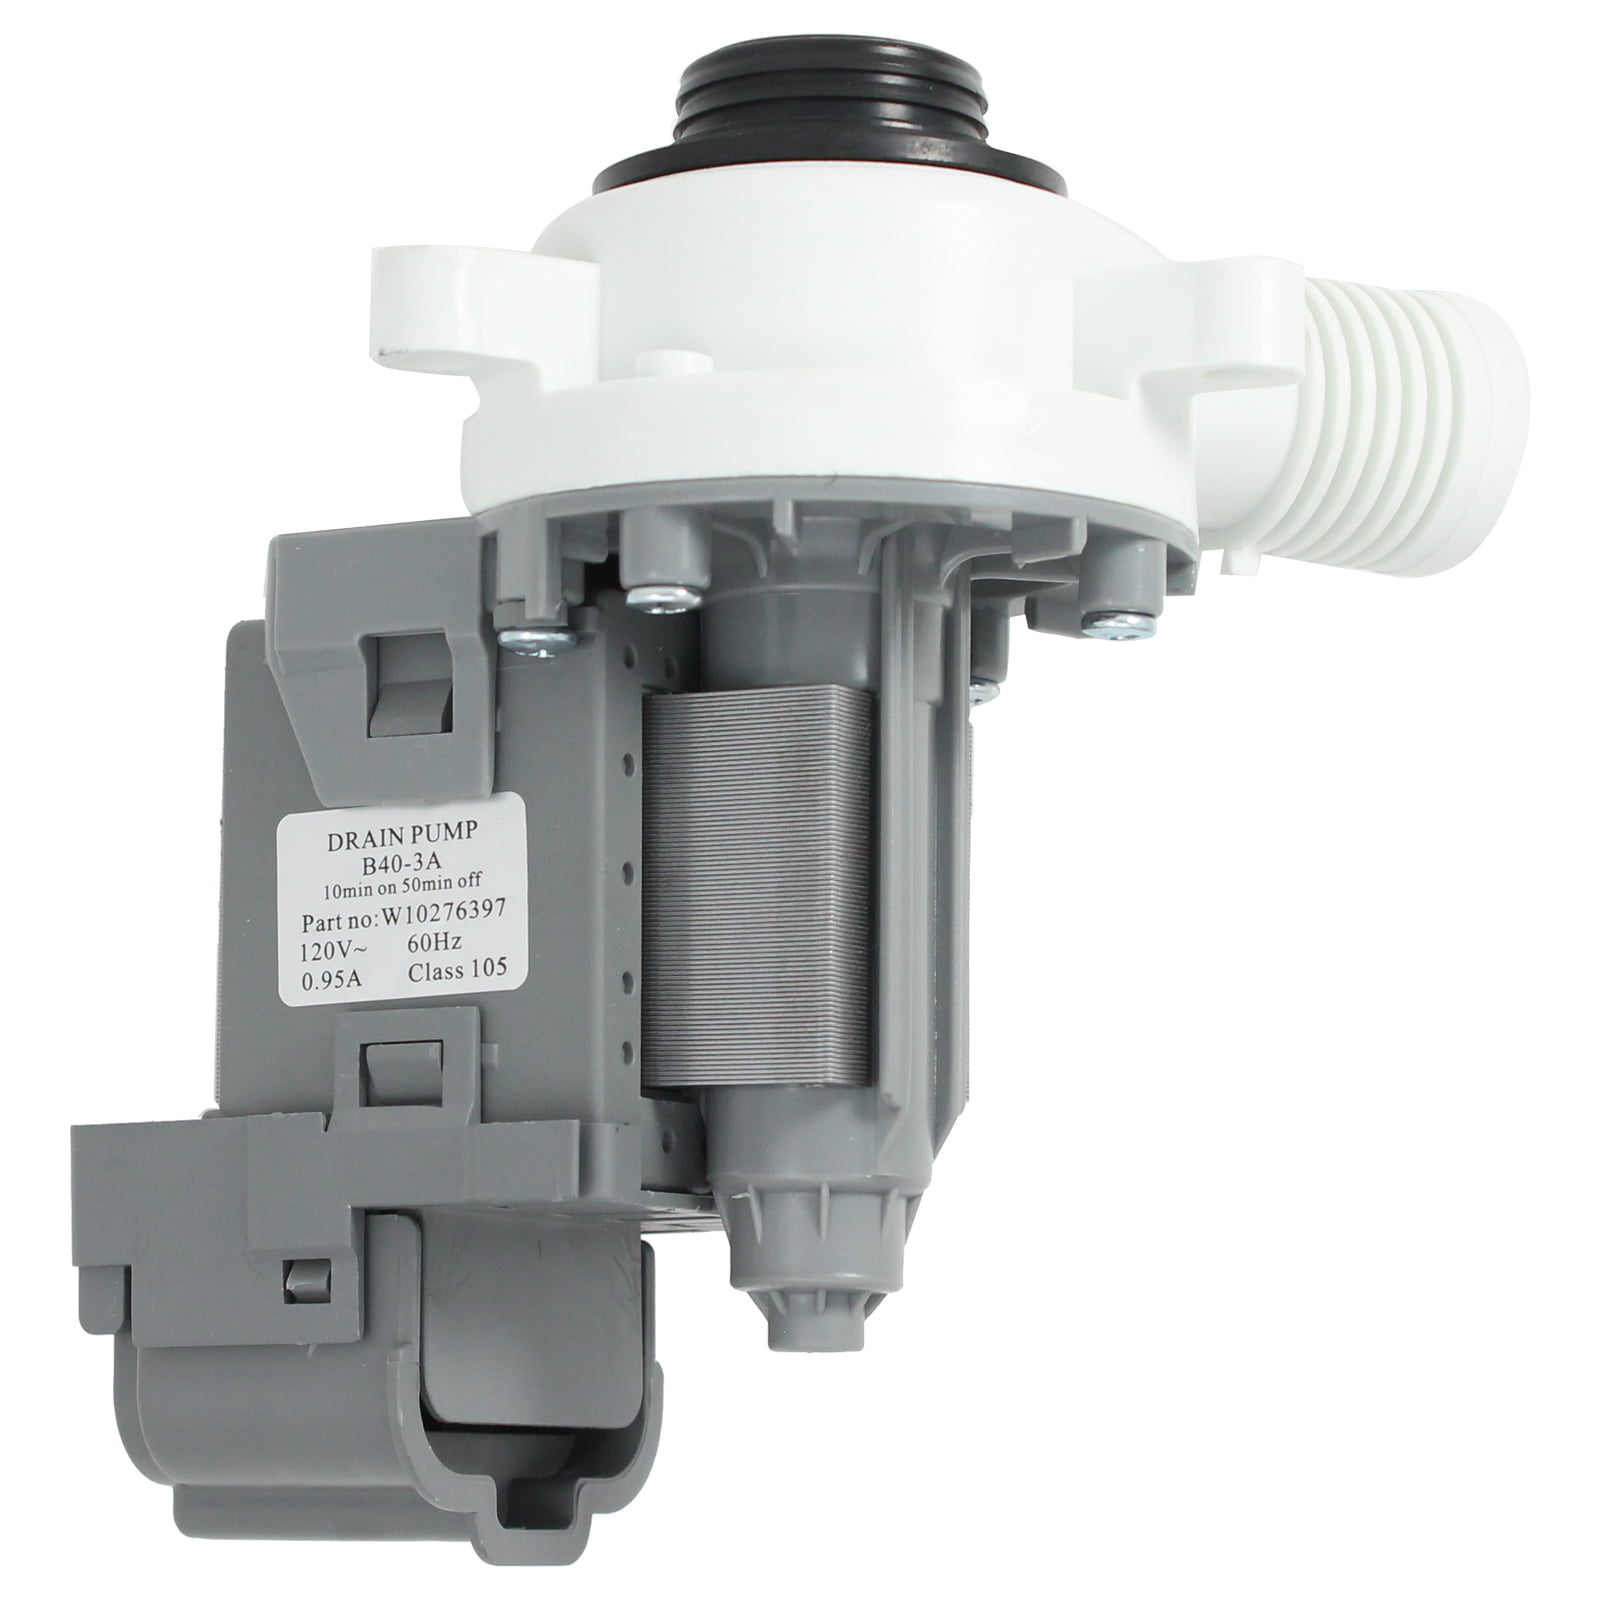 120V-60Hz-10min on 50min off part for Wh Details about   Beaquicy W10276397 Washer Drain Pump 